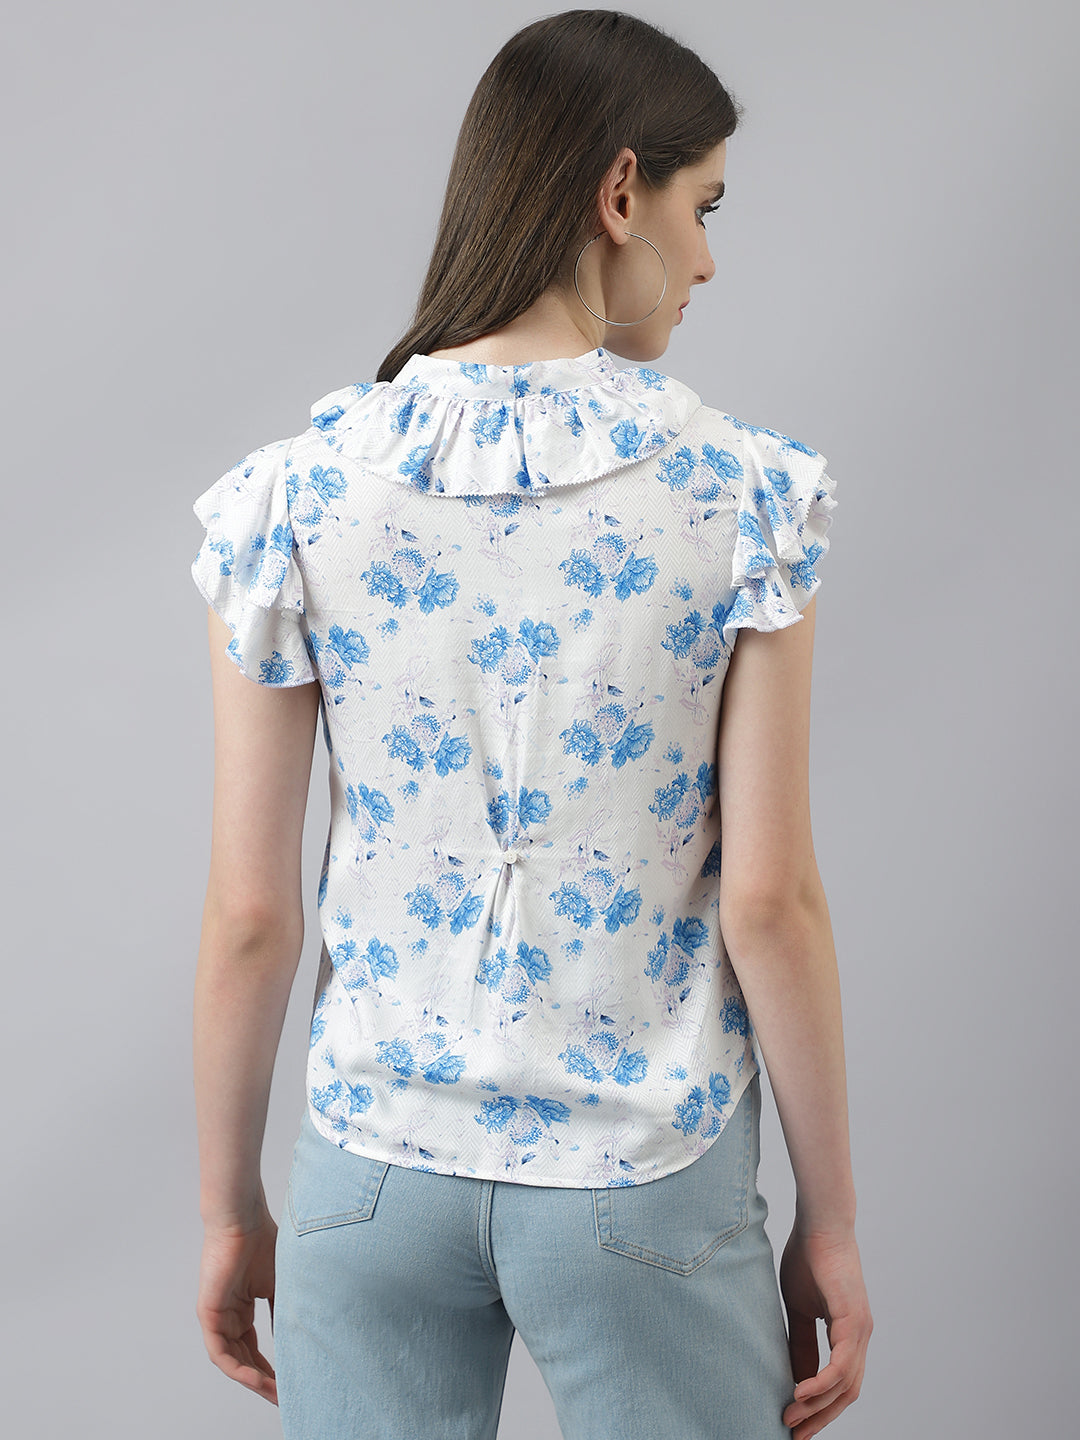 Blue Floral Print Top With Ruffles & Front Knot